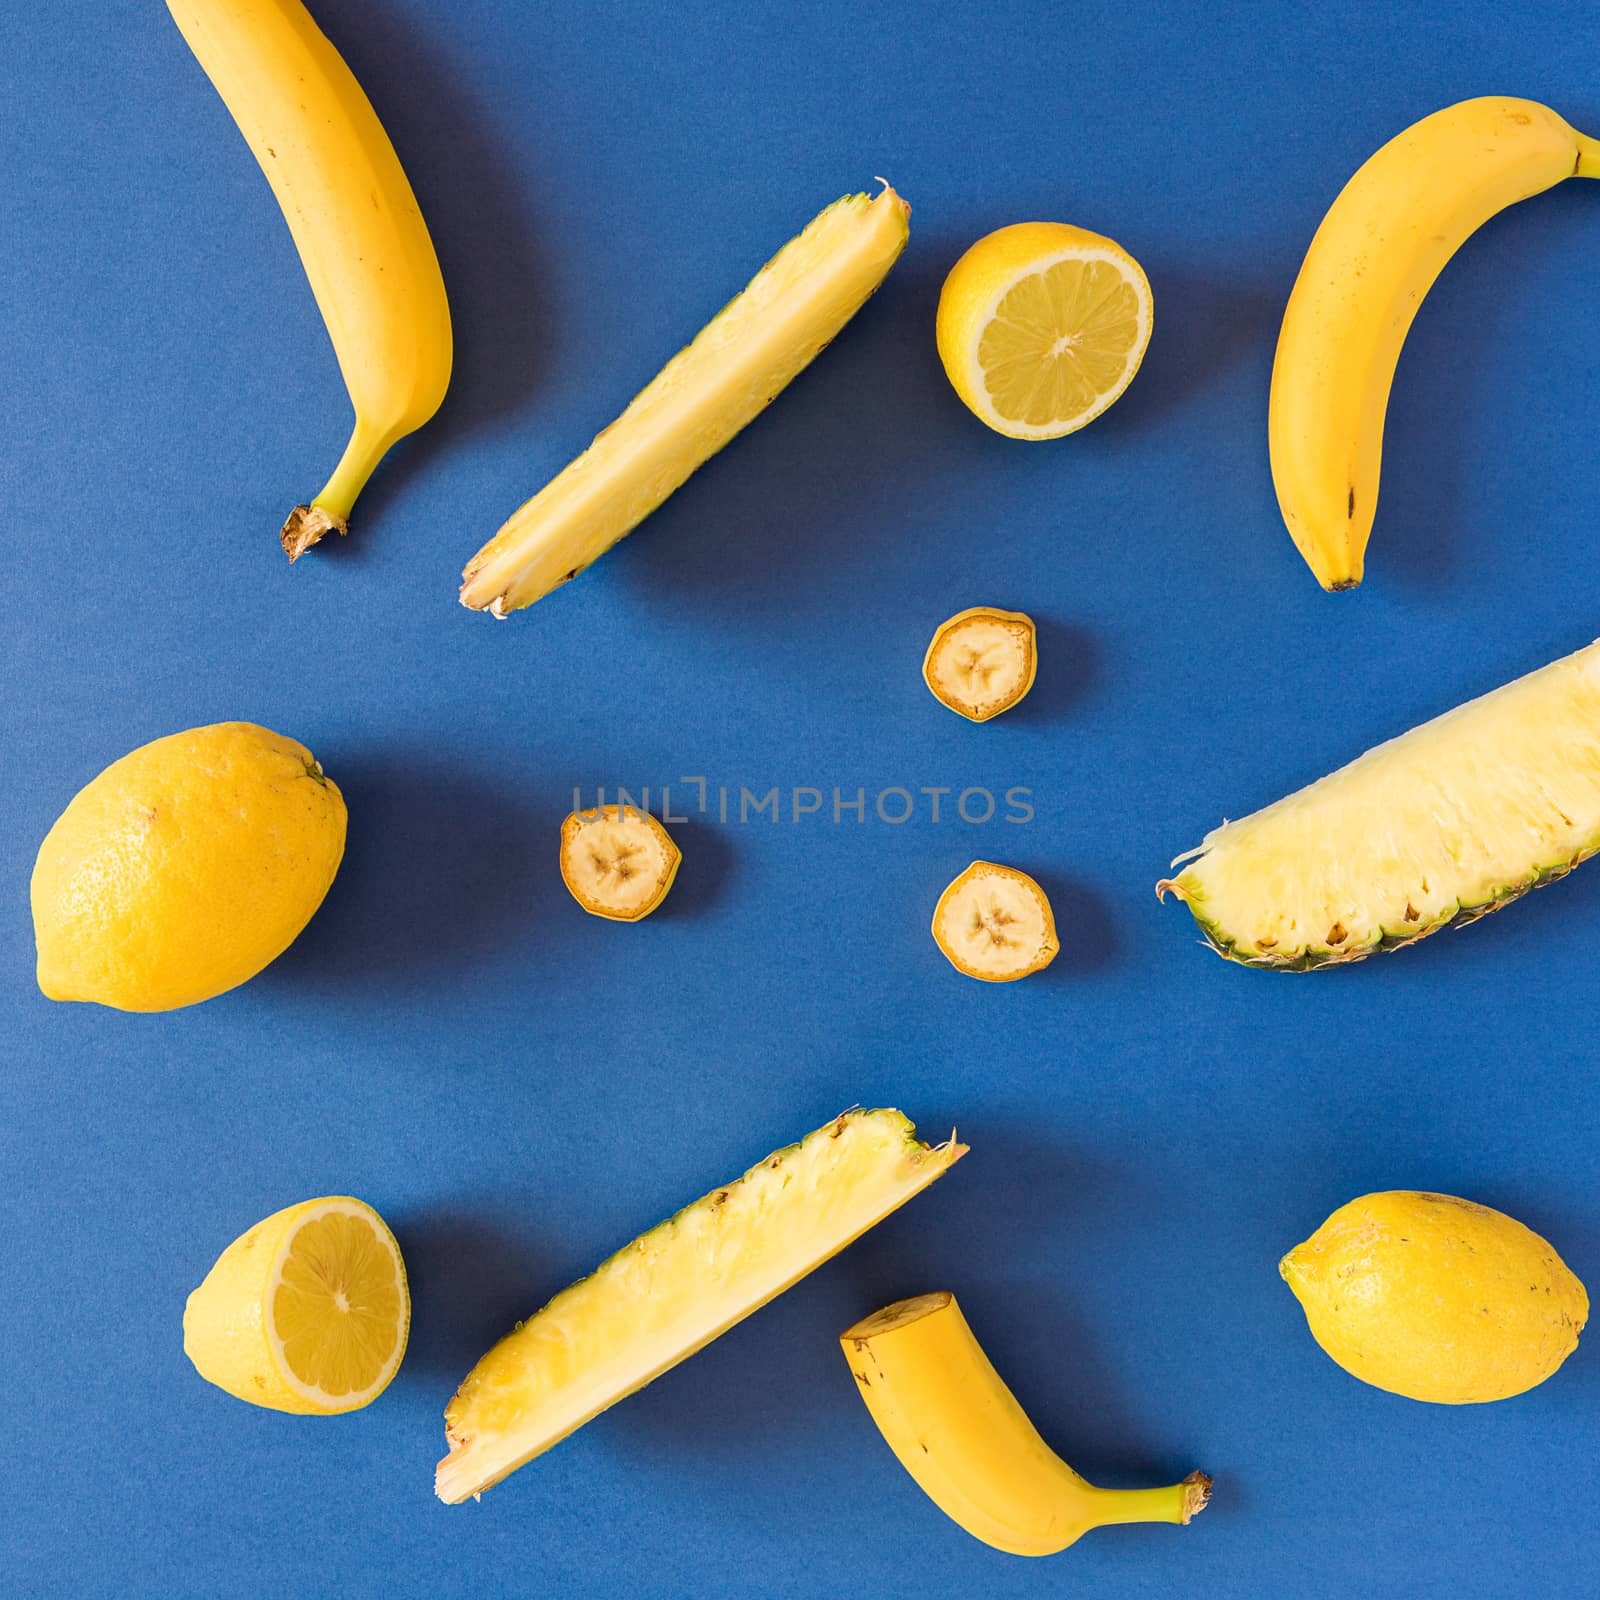 Yellow colored fruit over a blue background